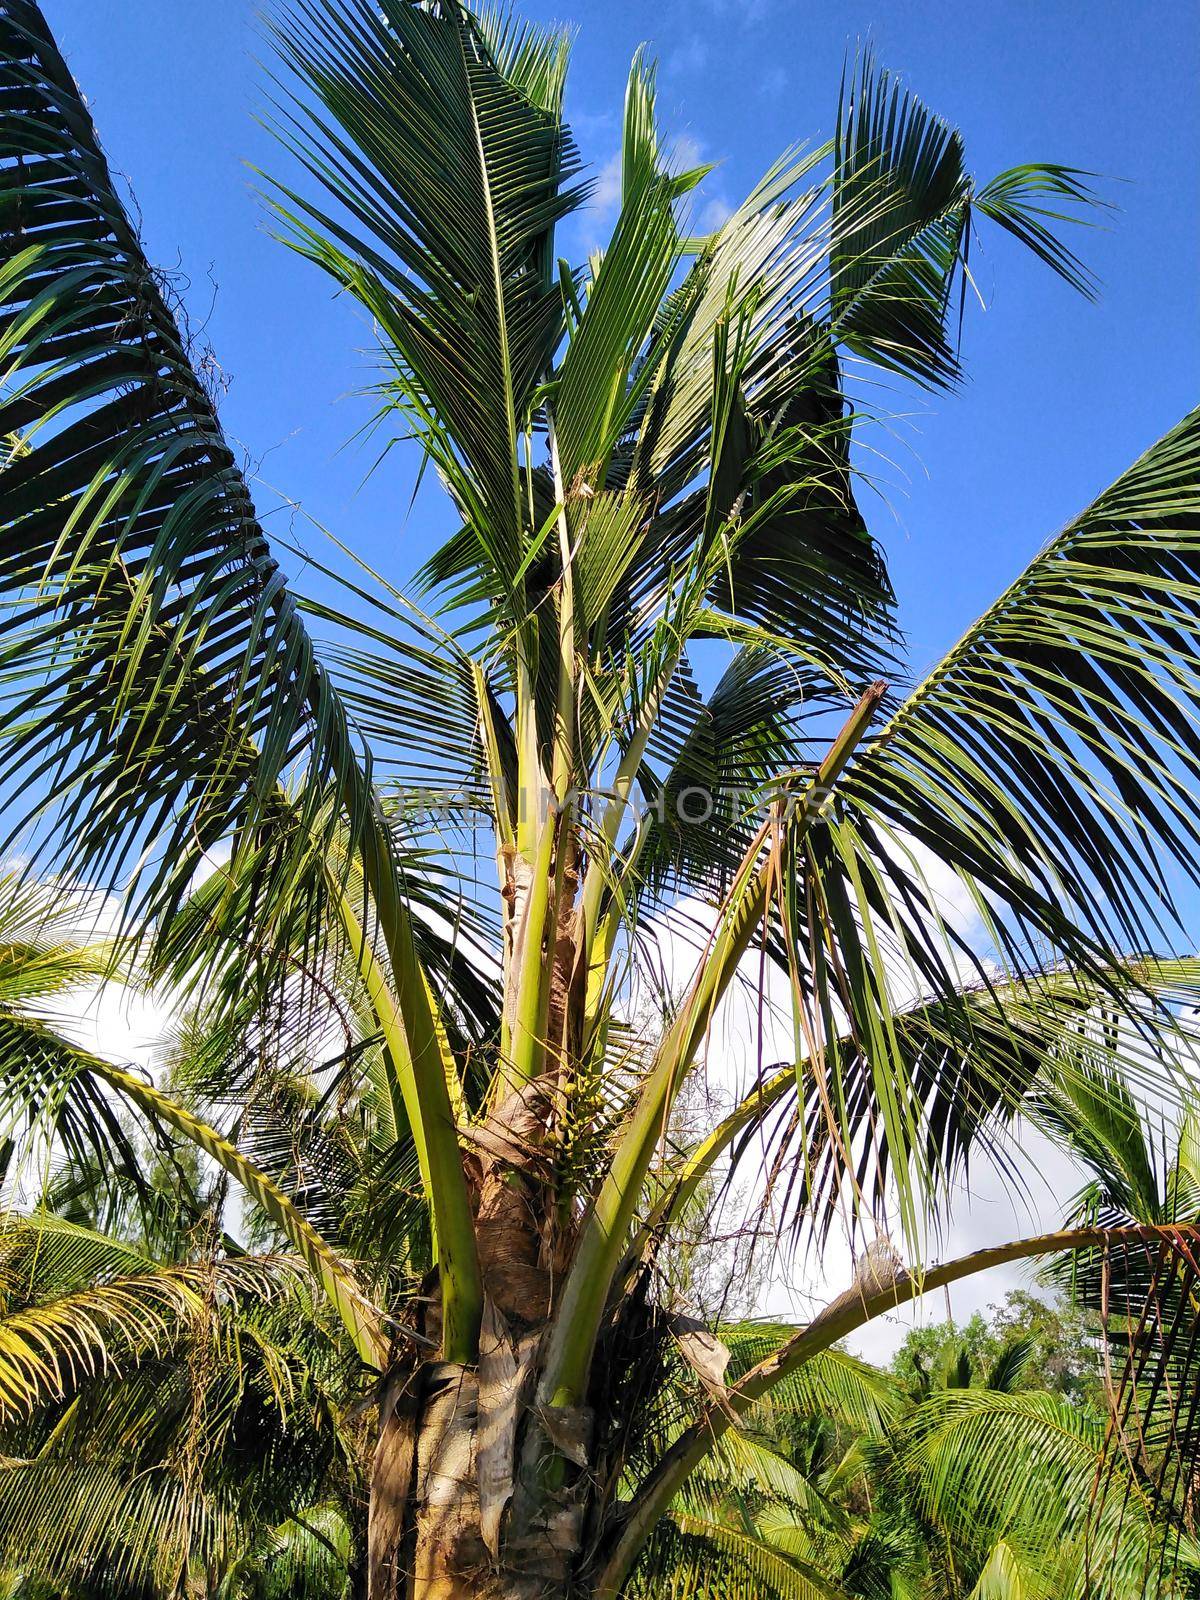 The coconut leaves damaged by the beetles are damaged.